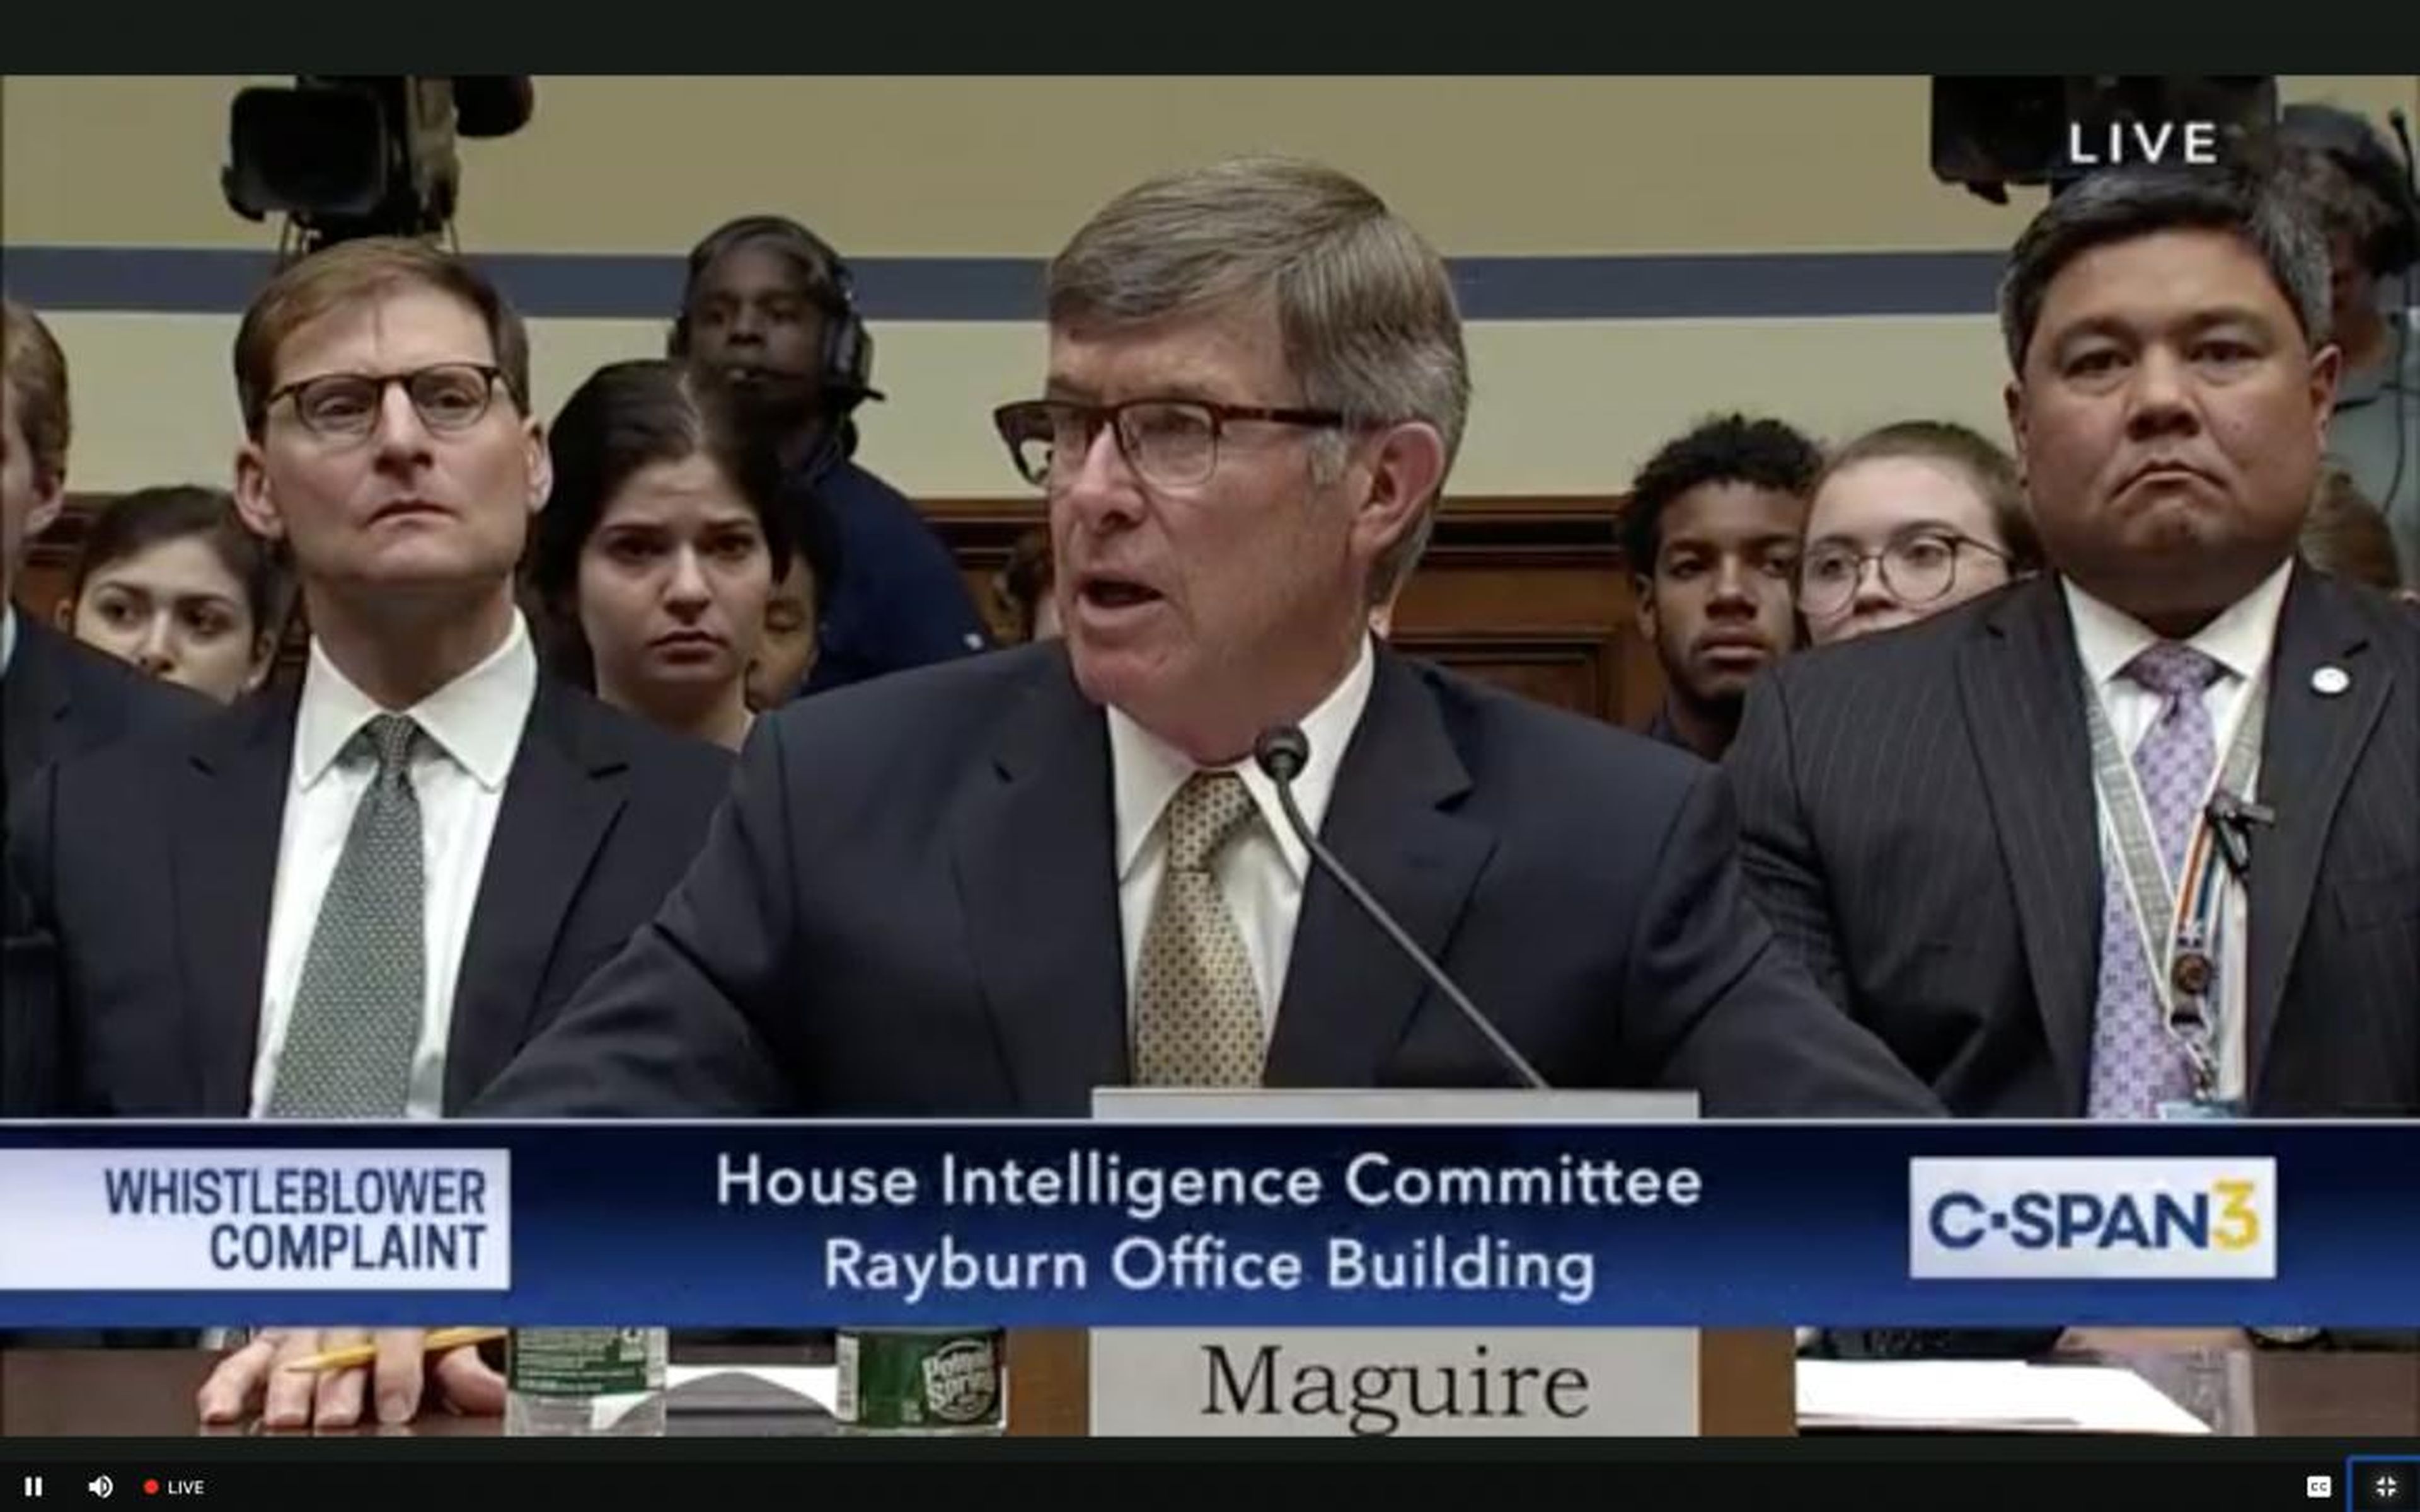 Acting Director of National Intelligence Joseph Maguire testifies before the House Intelligence Committee about the whistleblower complaint on Wednesday.